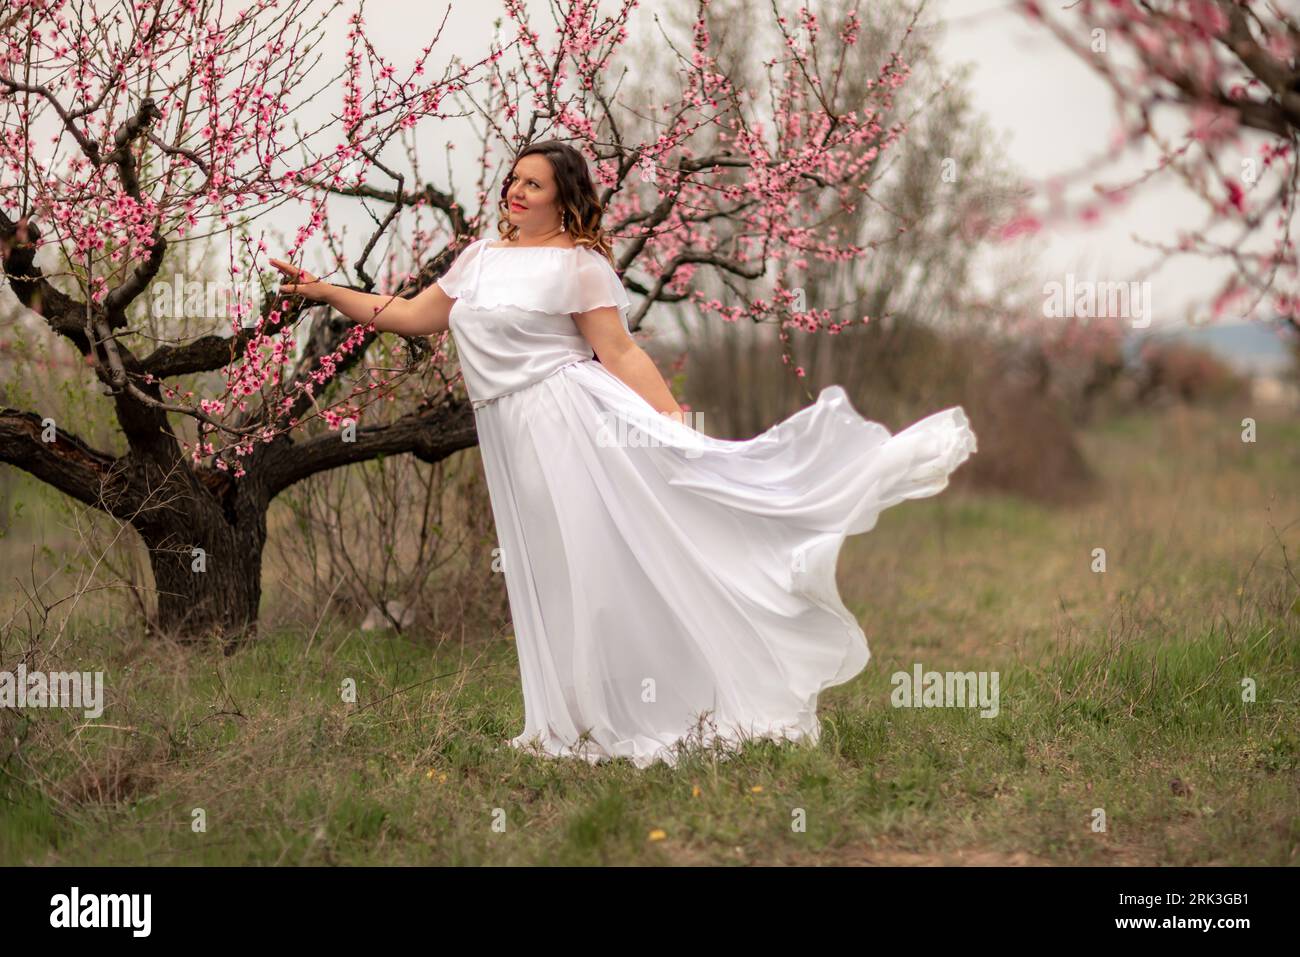 Woman peach blossom. Happy woman in white dress walking in the garden of blossoming peach trees in spring Stock Photo